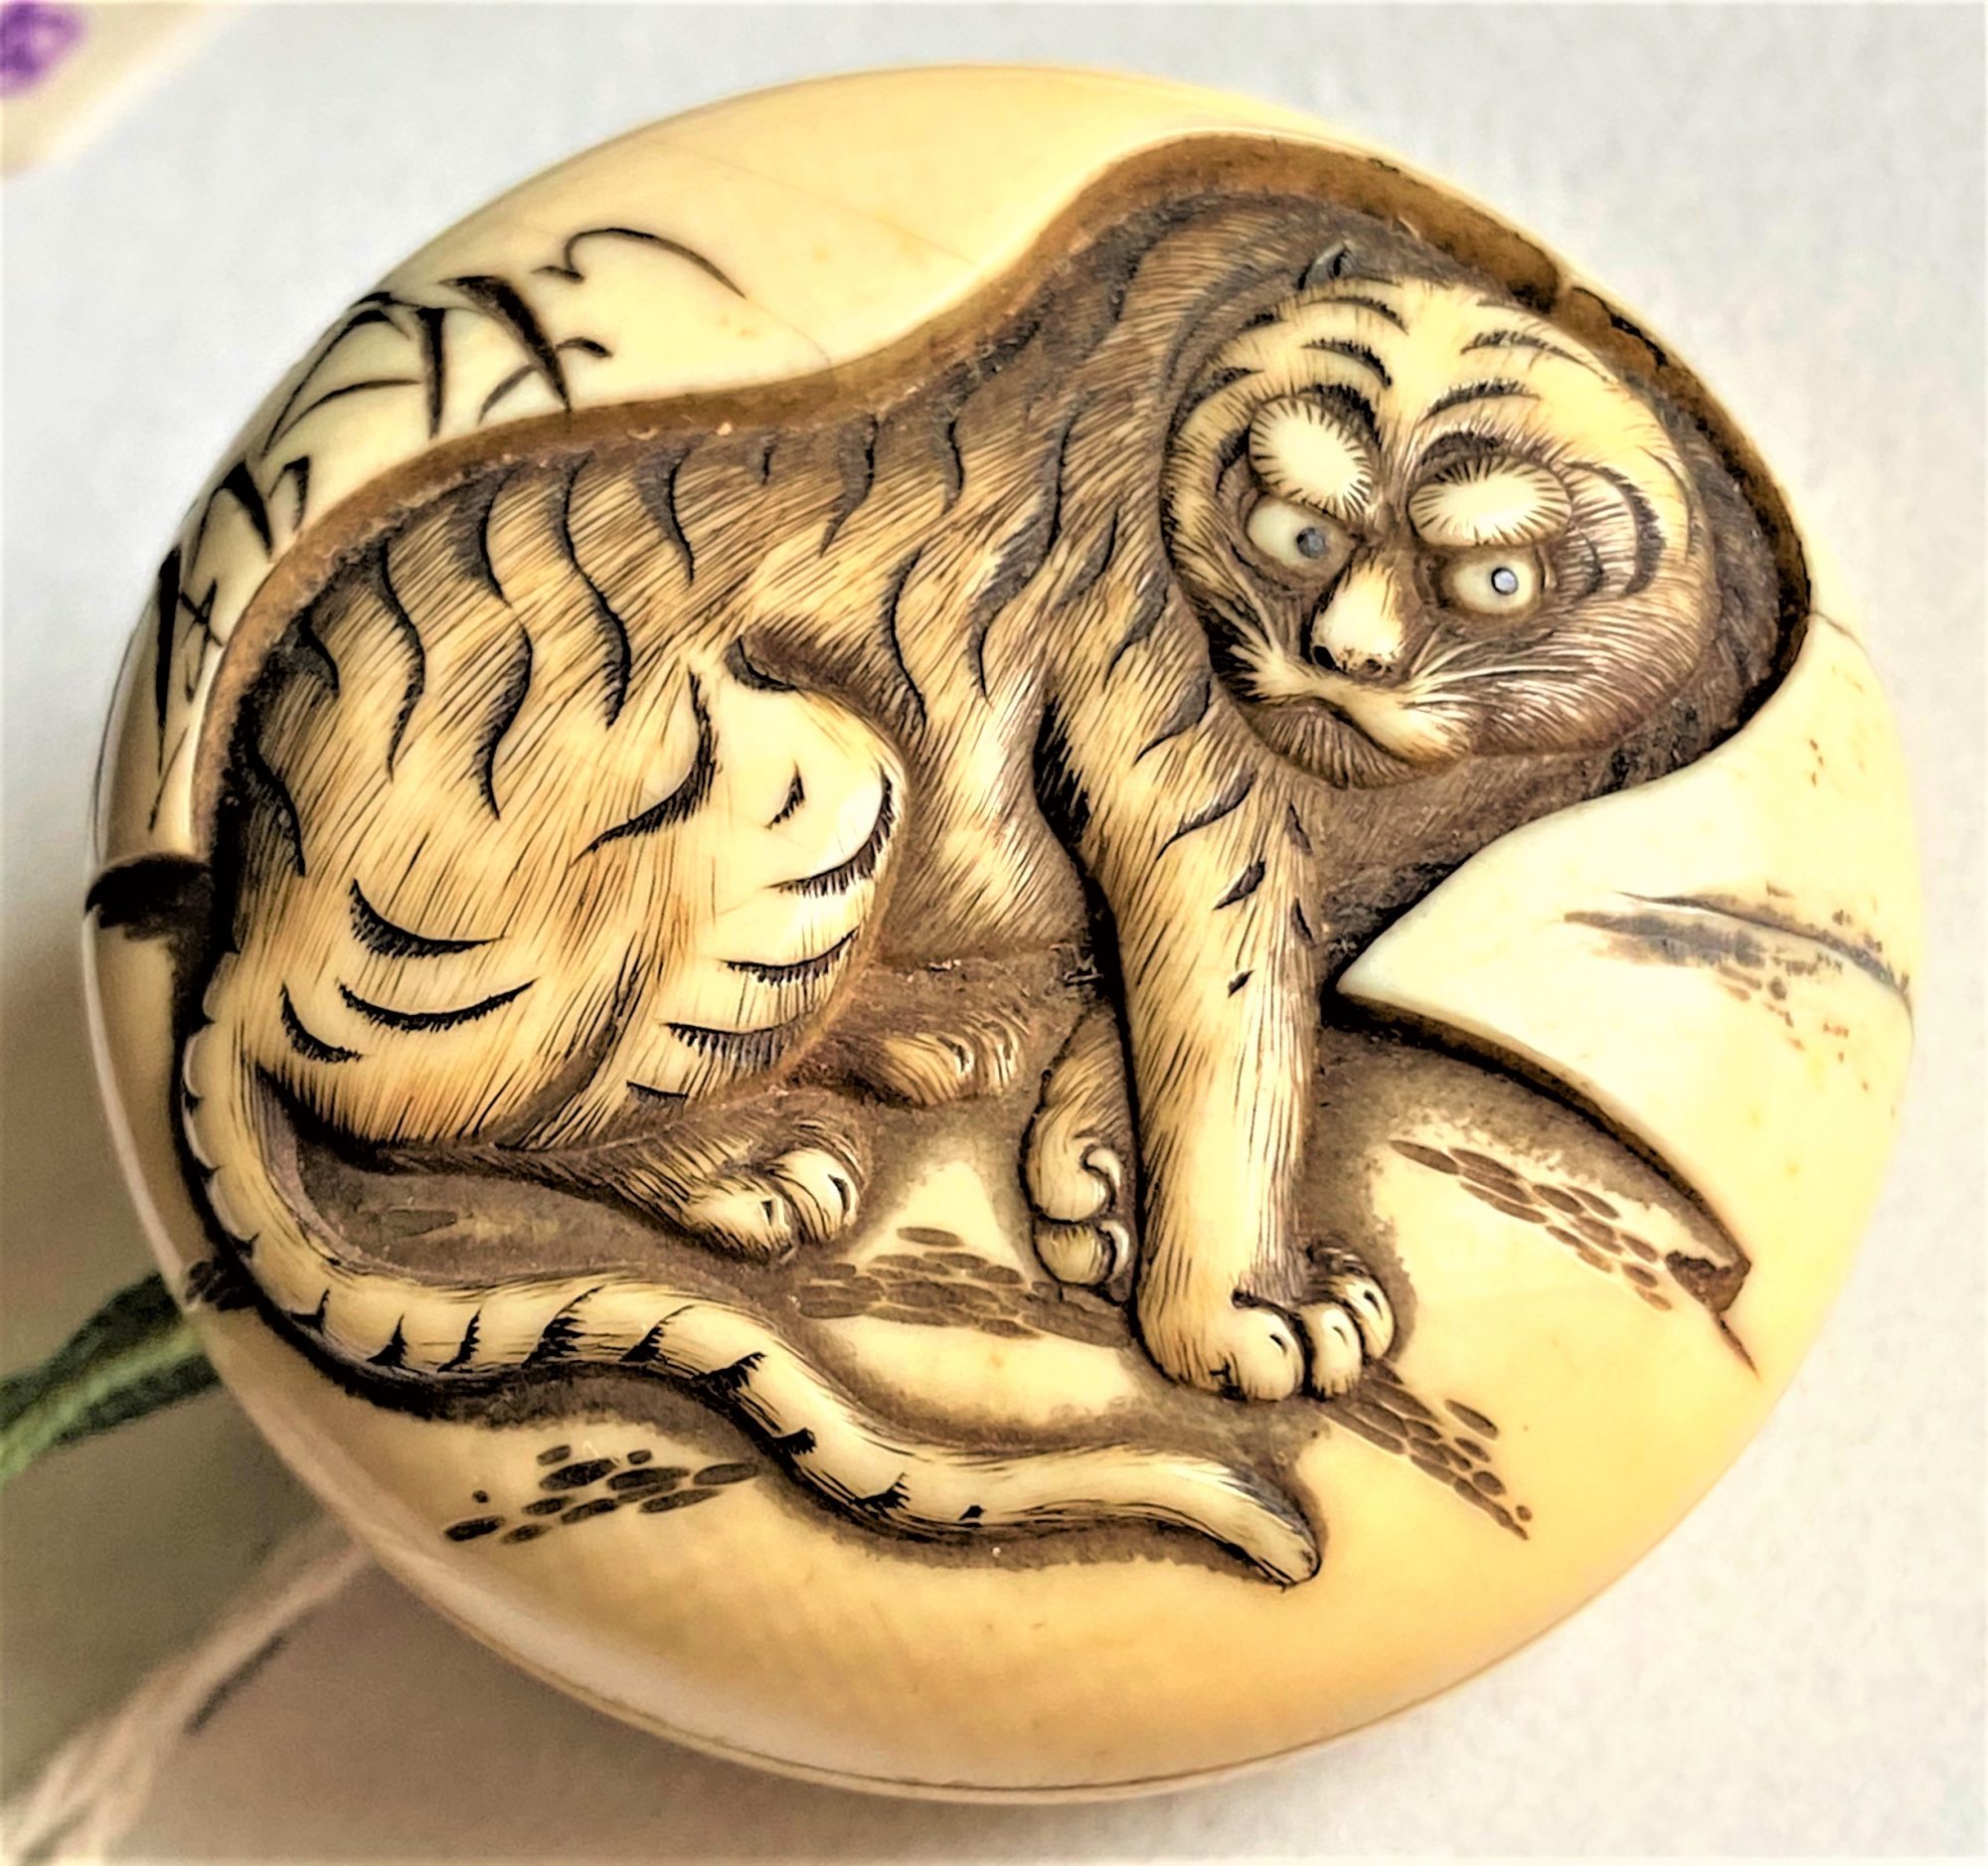 1 of several netsuke in the auction button